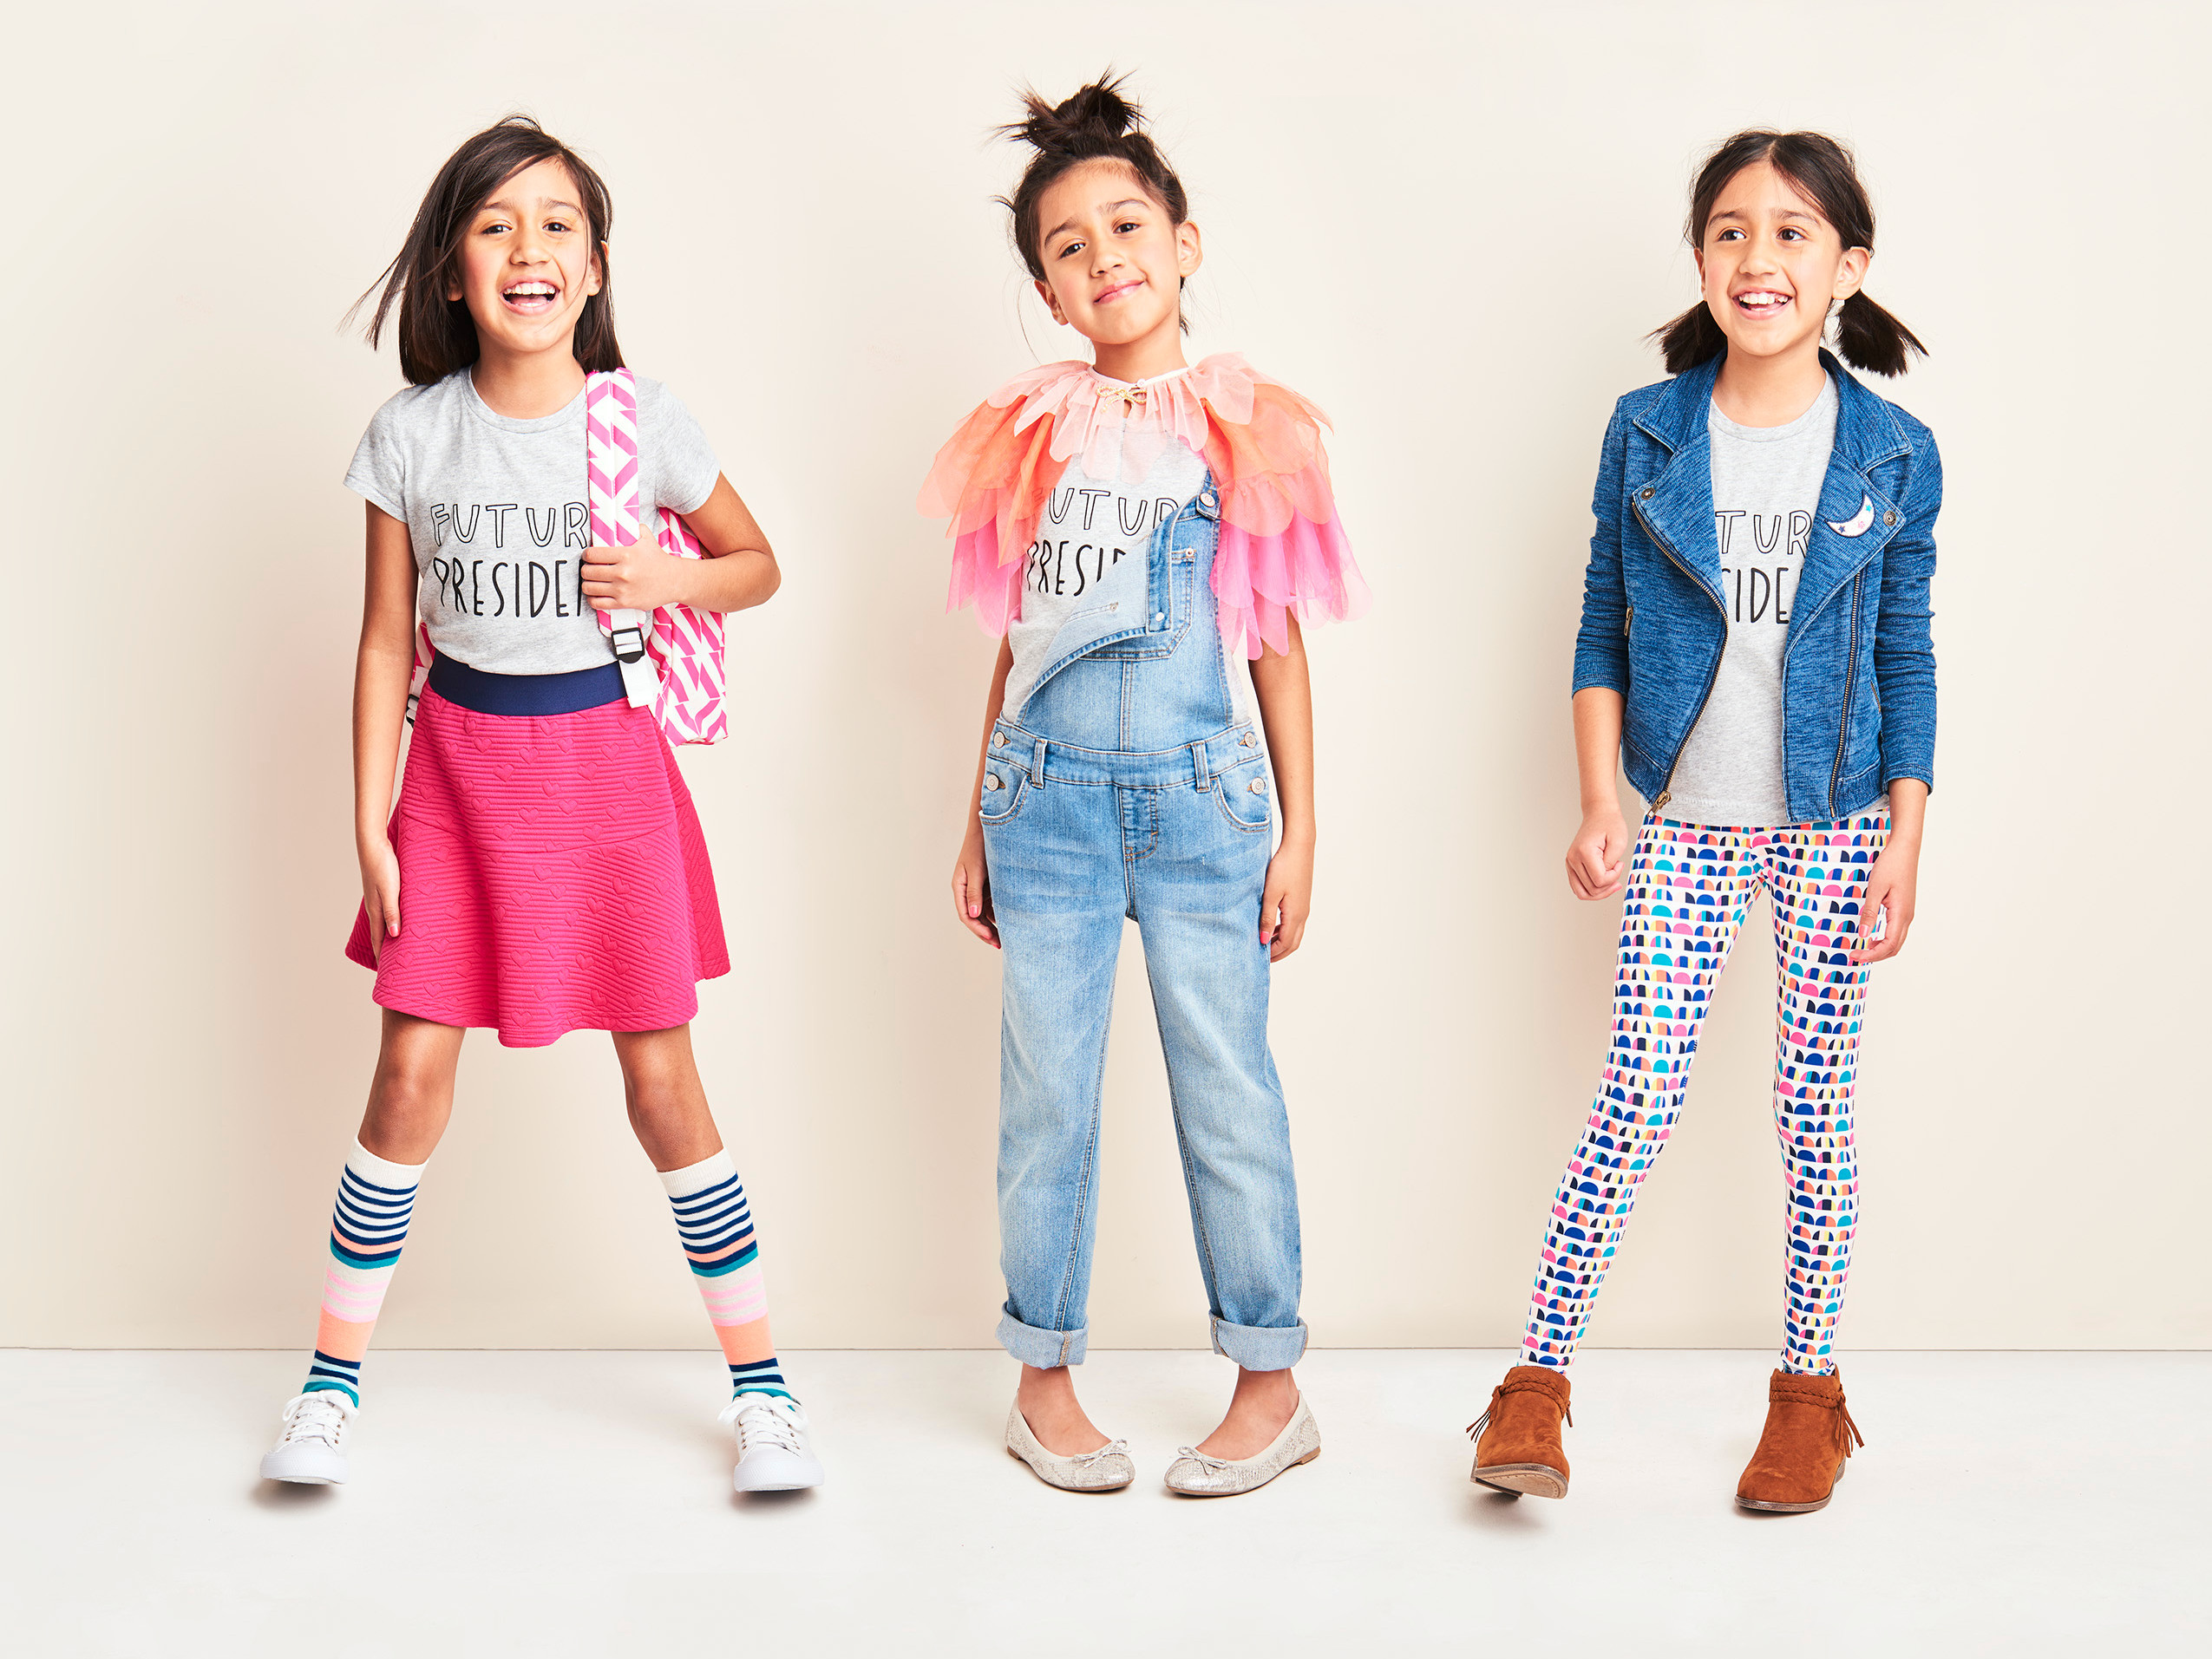 Child Fashion Clothes
 Tar is overhauling its kids clothing business